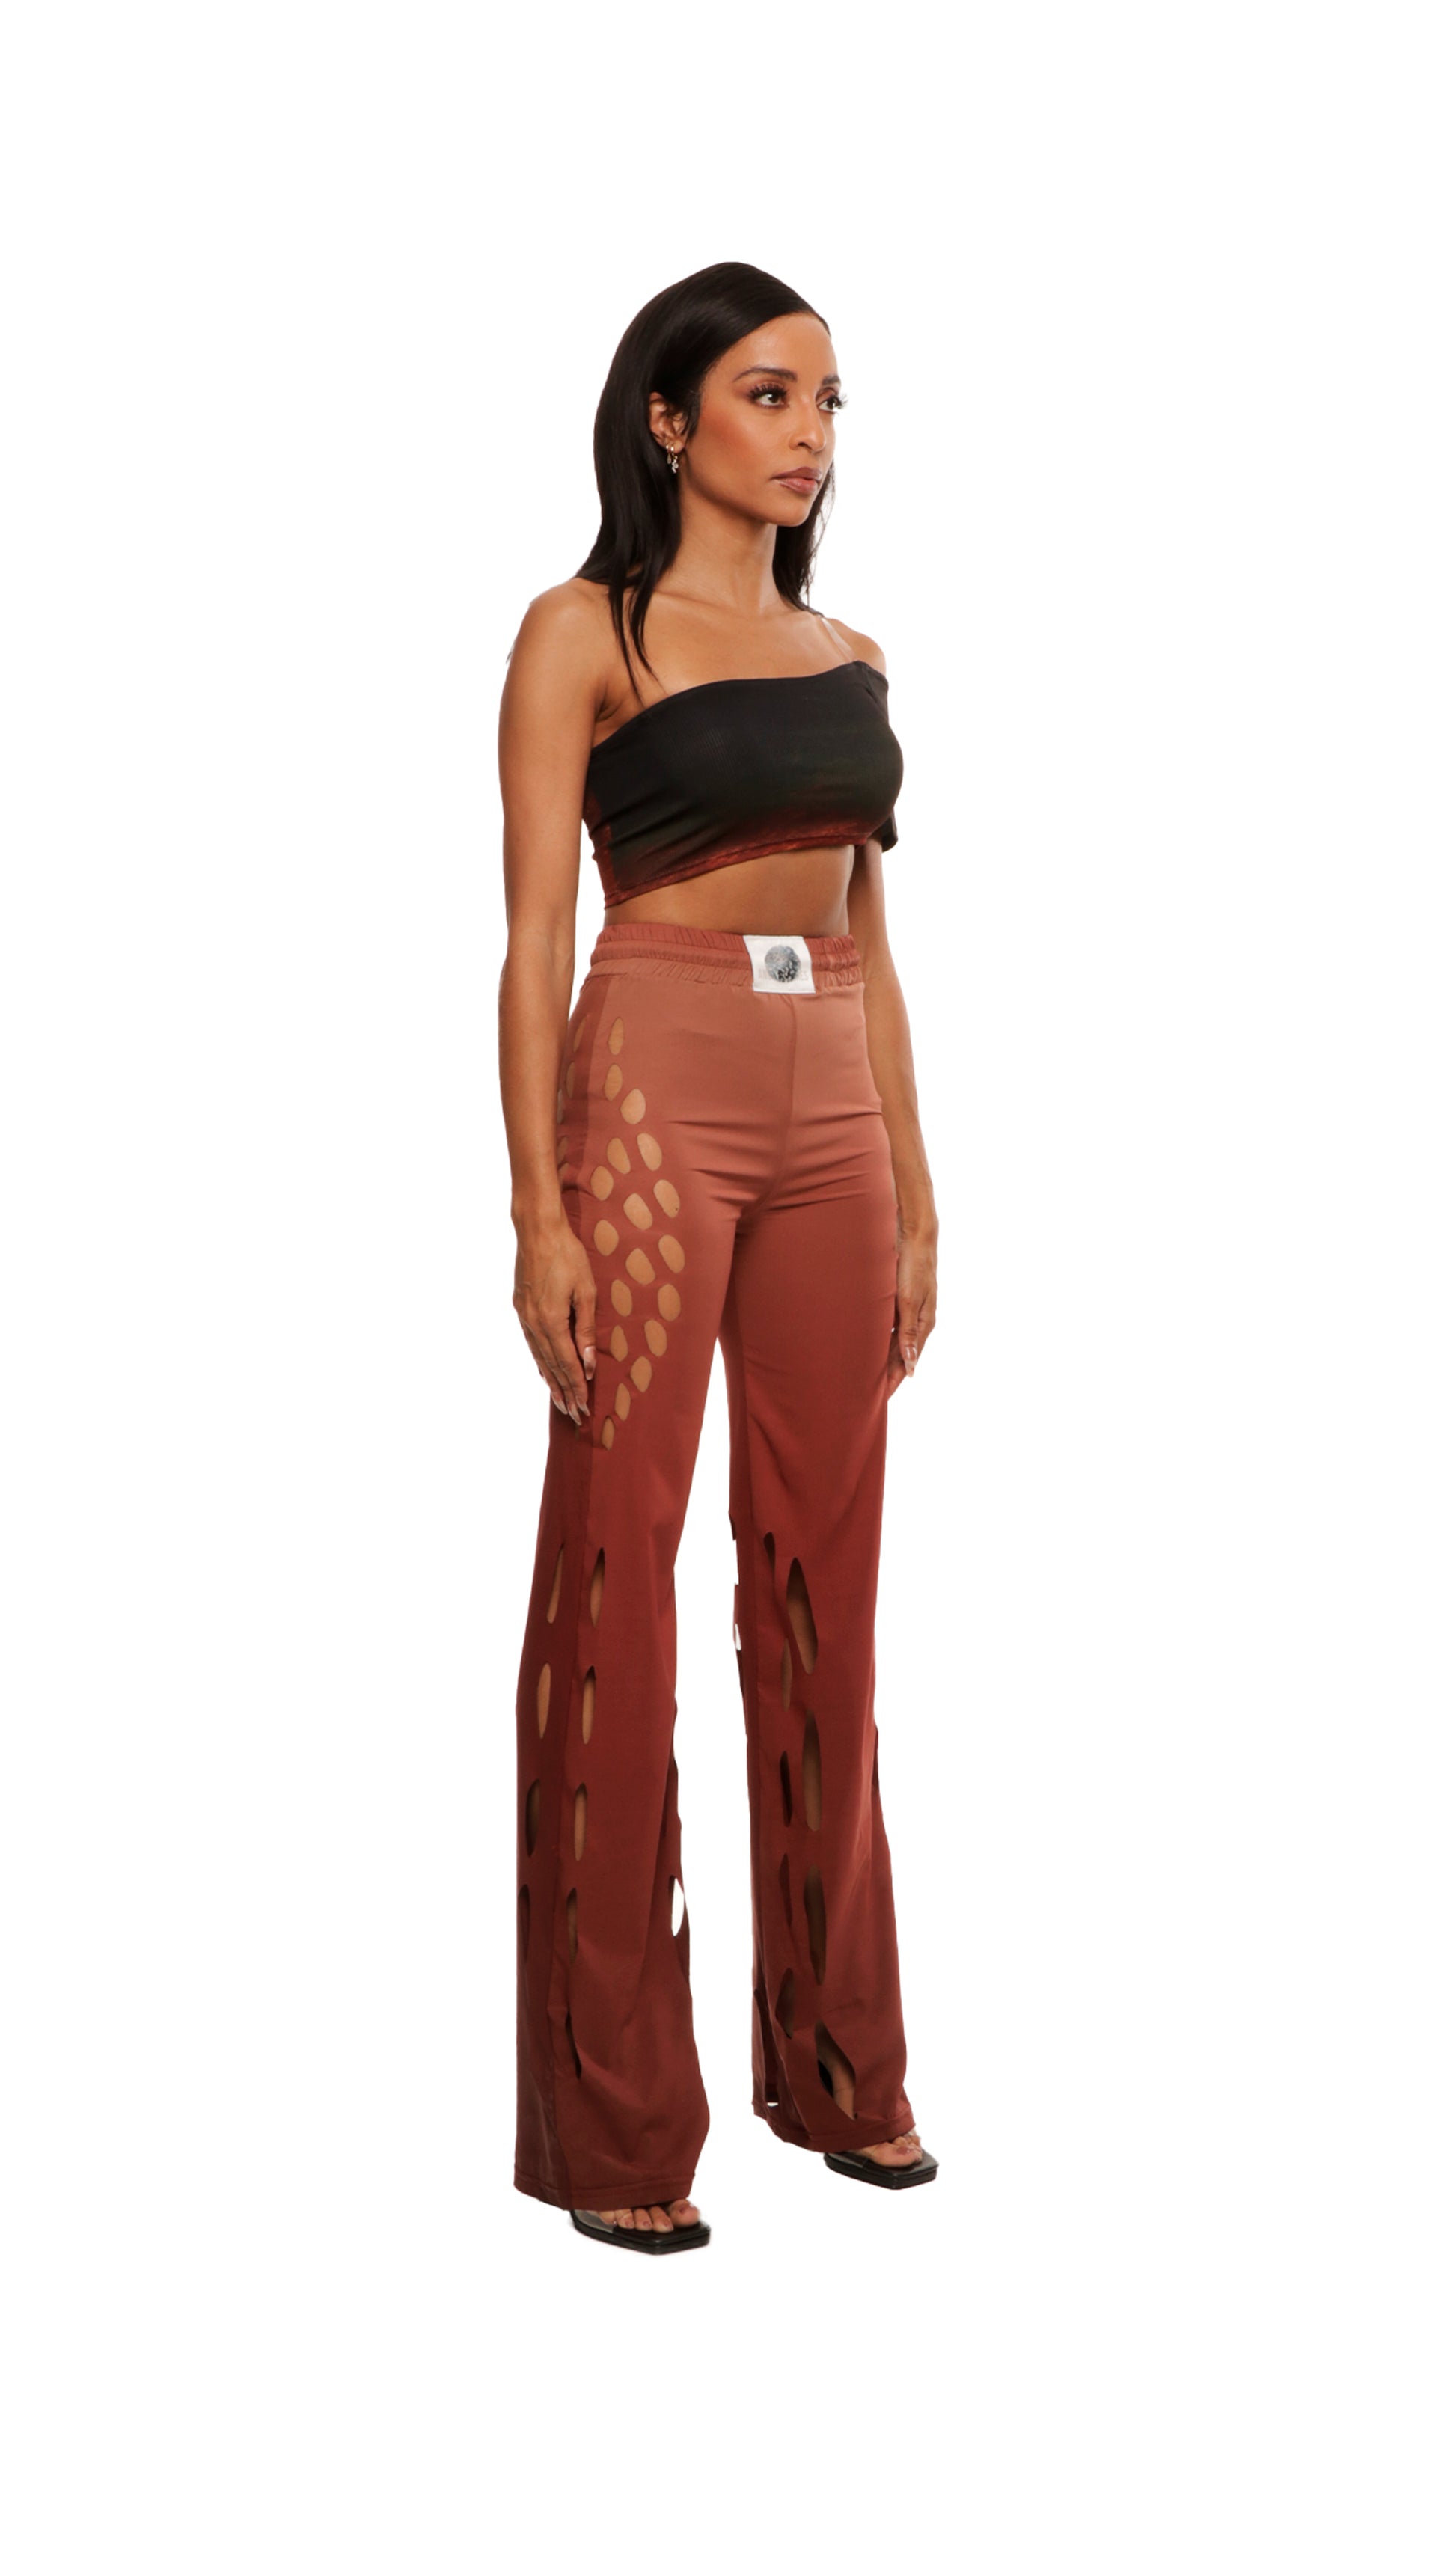 Woman who looks like Beyoncé or Aaliyah wears gradient brown toned asymmetrical top with clear strap, side view